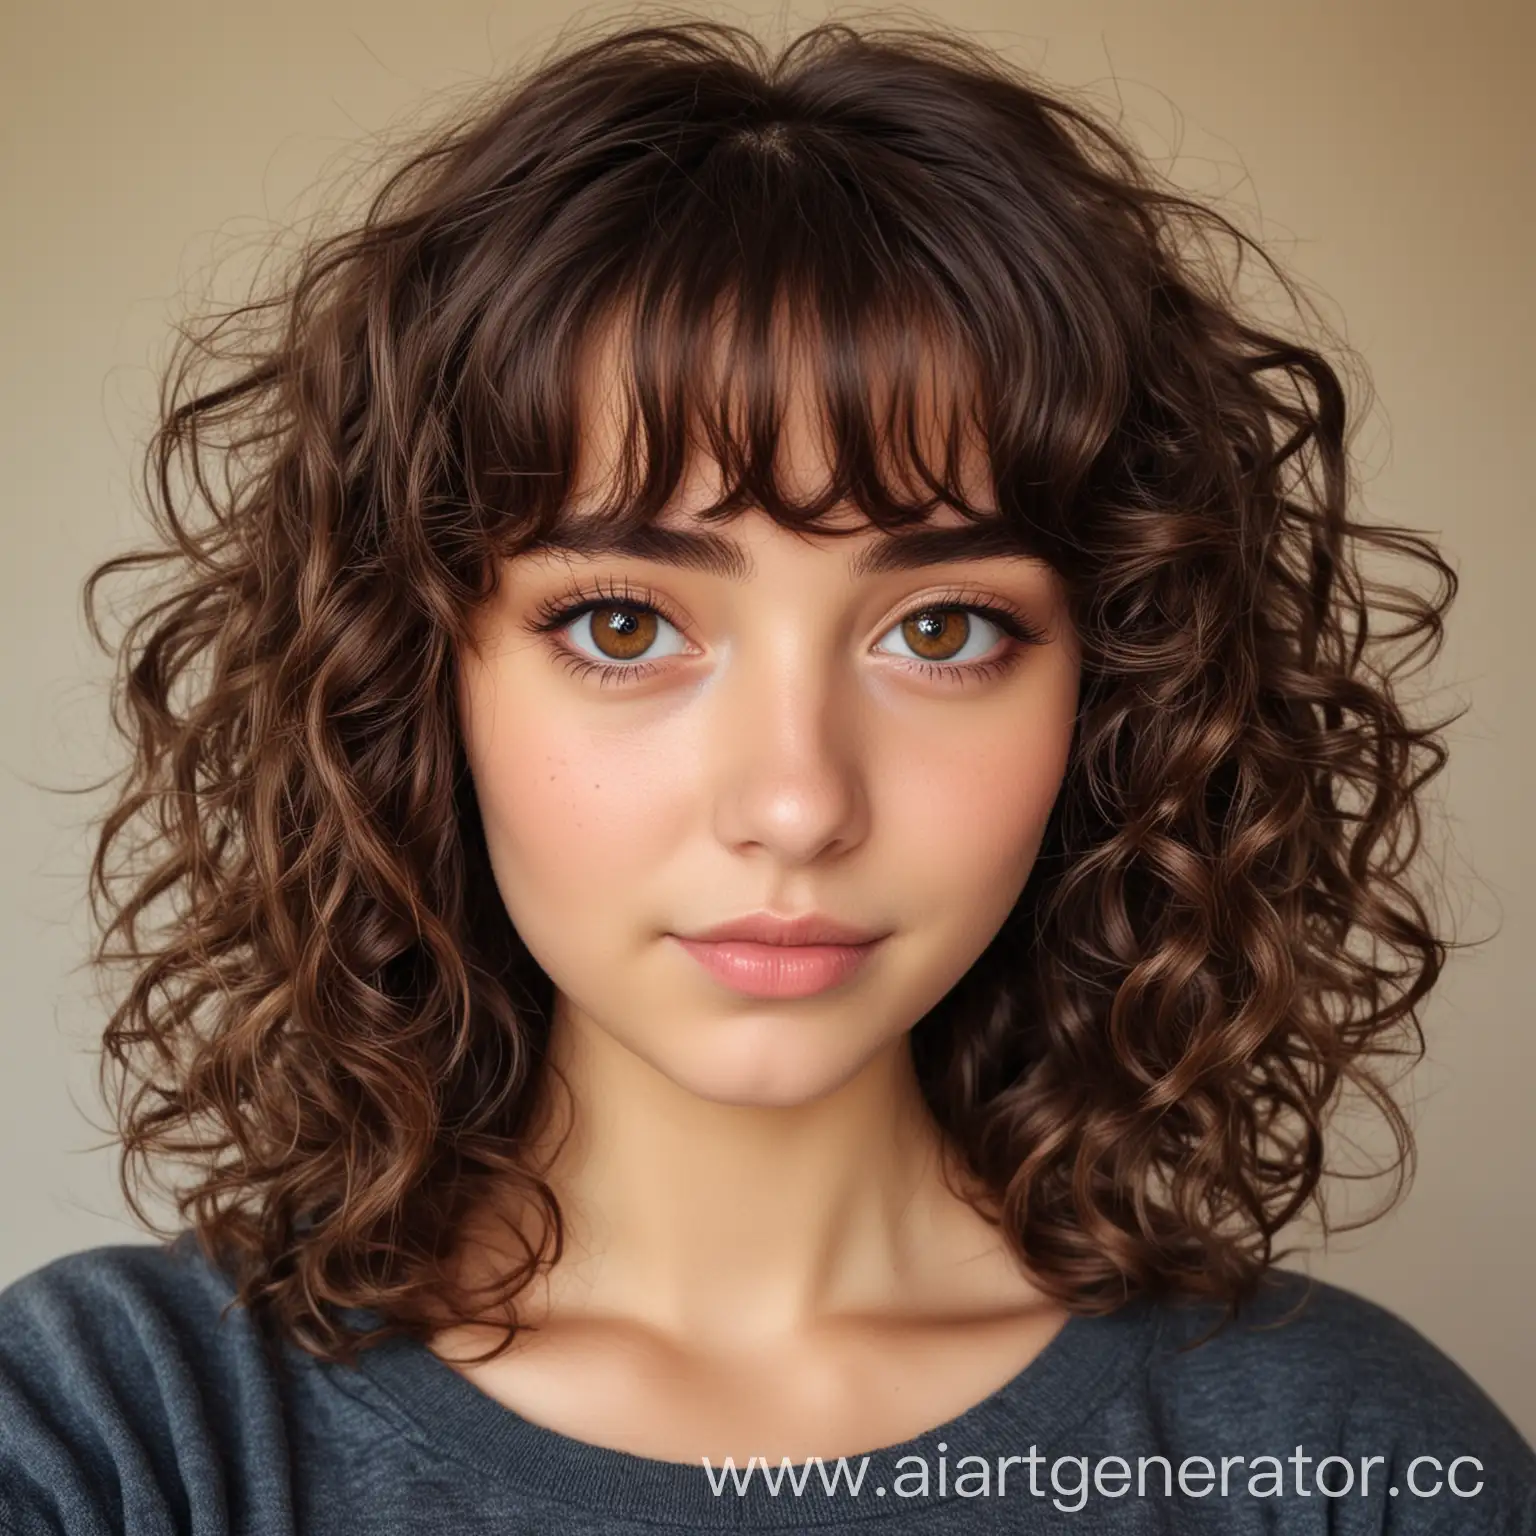 Brunette-Girl-with-Brown-Eyes-CurlyWavy-Hair-and-Round-Face-with-Bangs